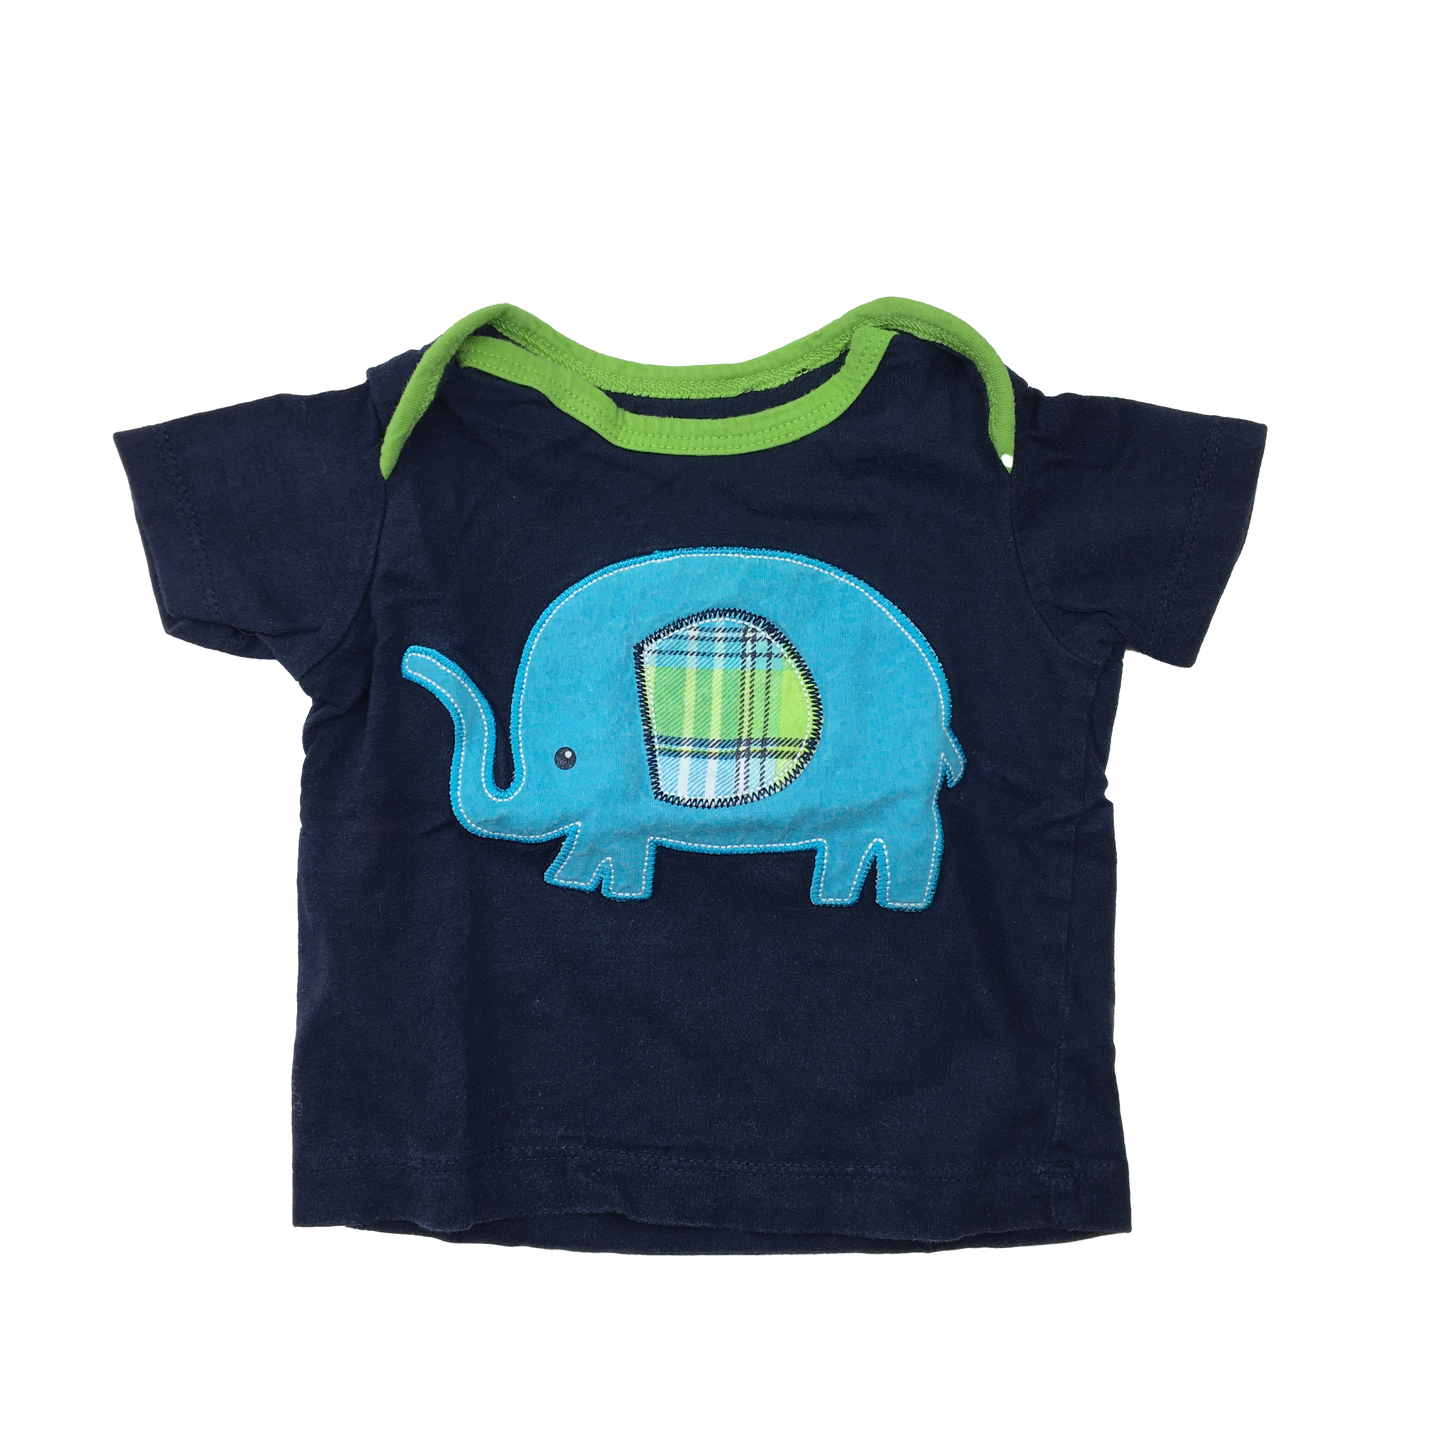 George Navy T-Shirt with Blue Elephant 0-3M